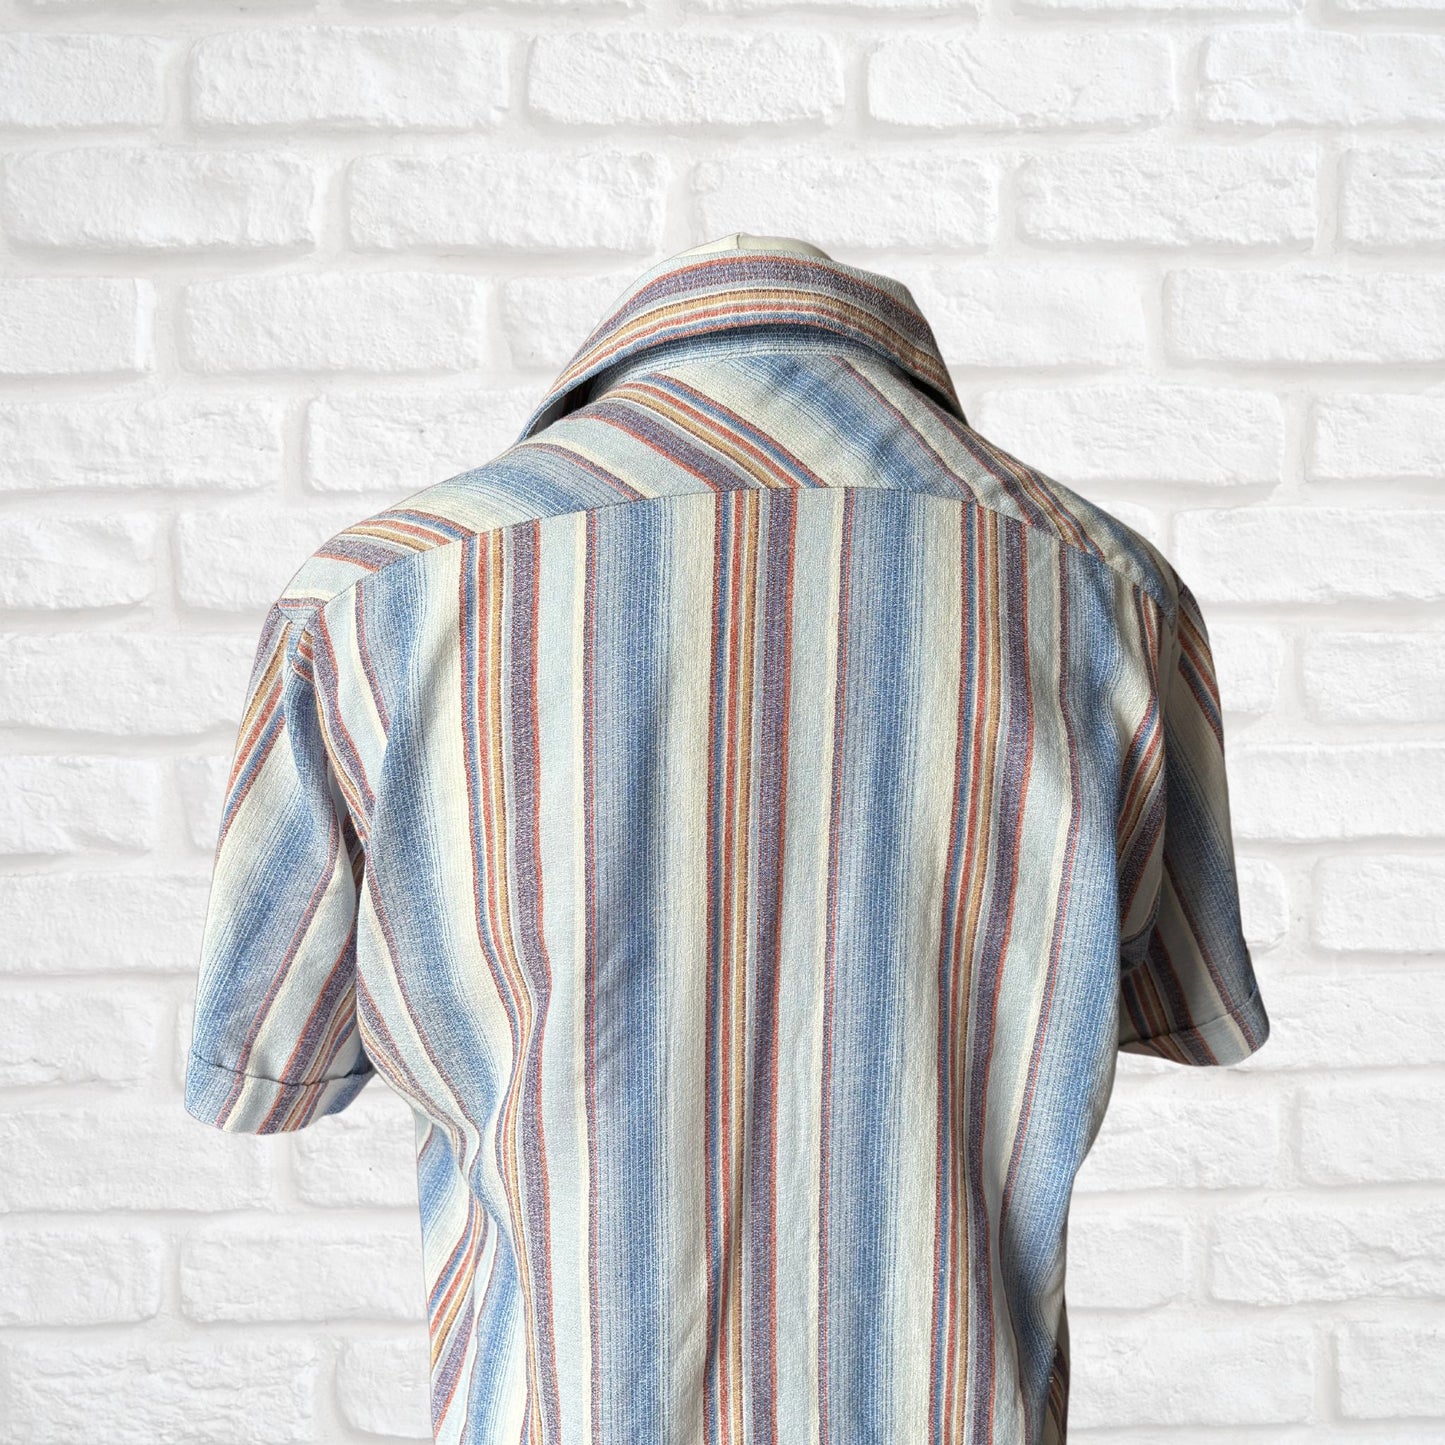 70s Vintage Striped Short Sleeved Shirt  - Classic Retro Style. Approx UK size L - XL (men) 20-22(women )